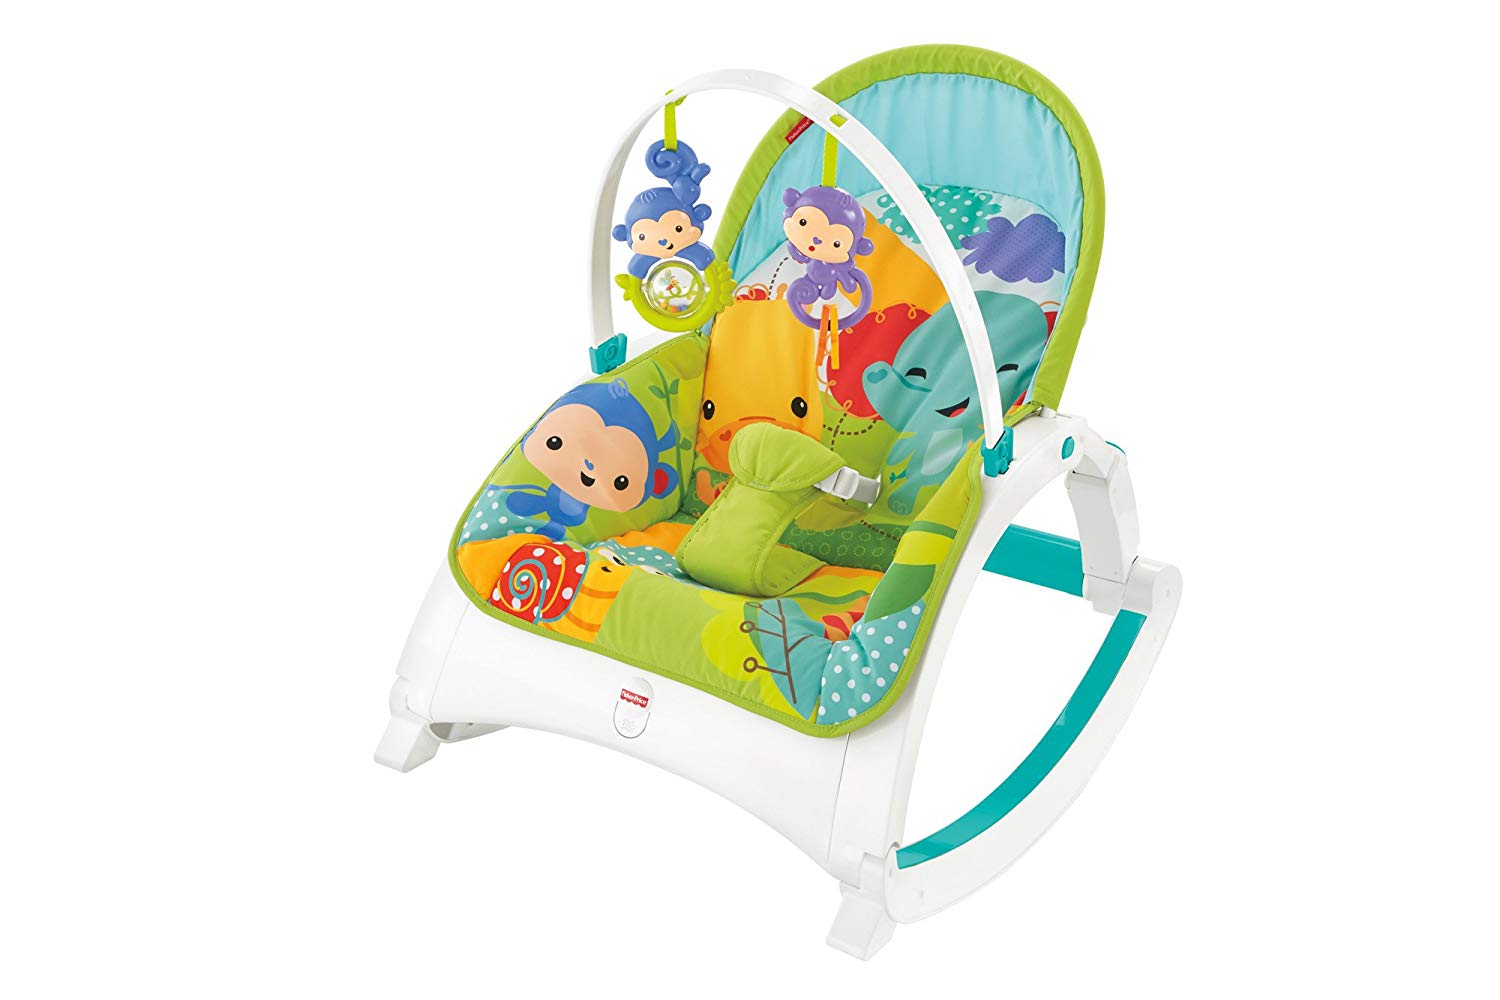 Mattel Fisher-Price Rainforest CMR10 Compact 2 in 1 Swing Seat